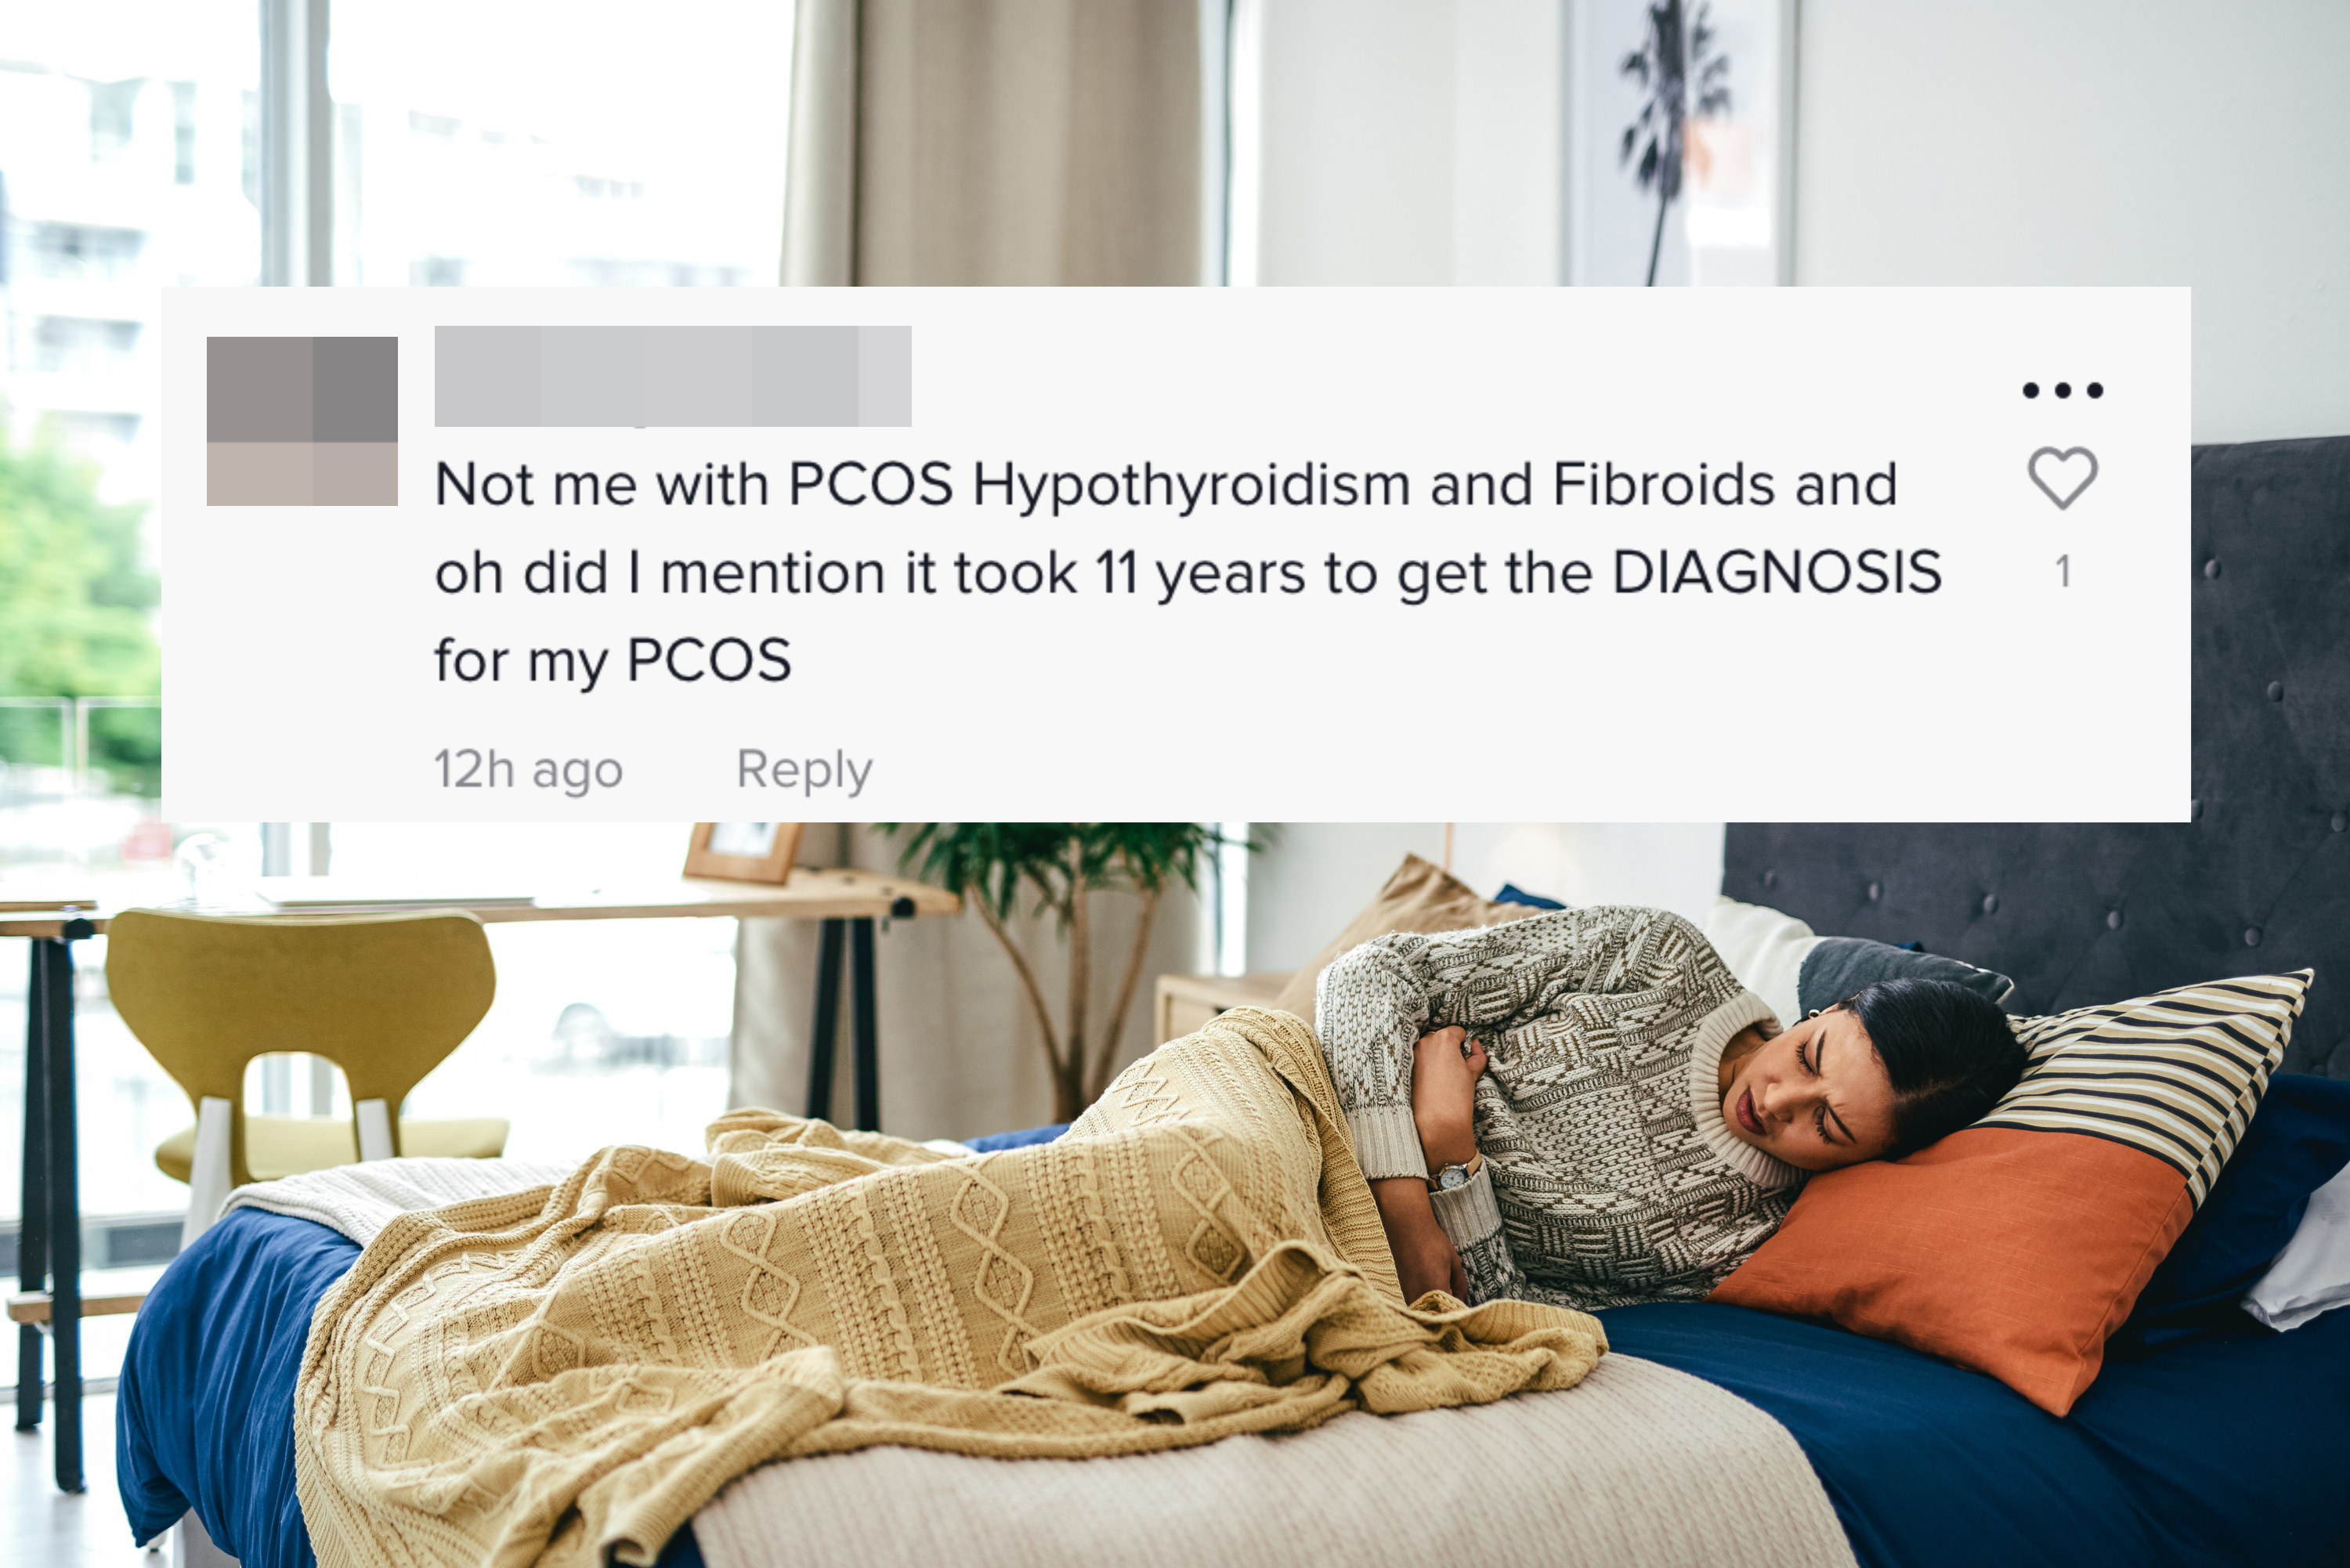 woman lying in bed in pain overlaid with tiktok comment saying I have PCOS hyperthyroidism and fibroids and it took 11 years to get diagnosed with PCOS